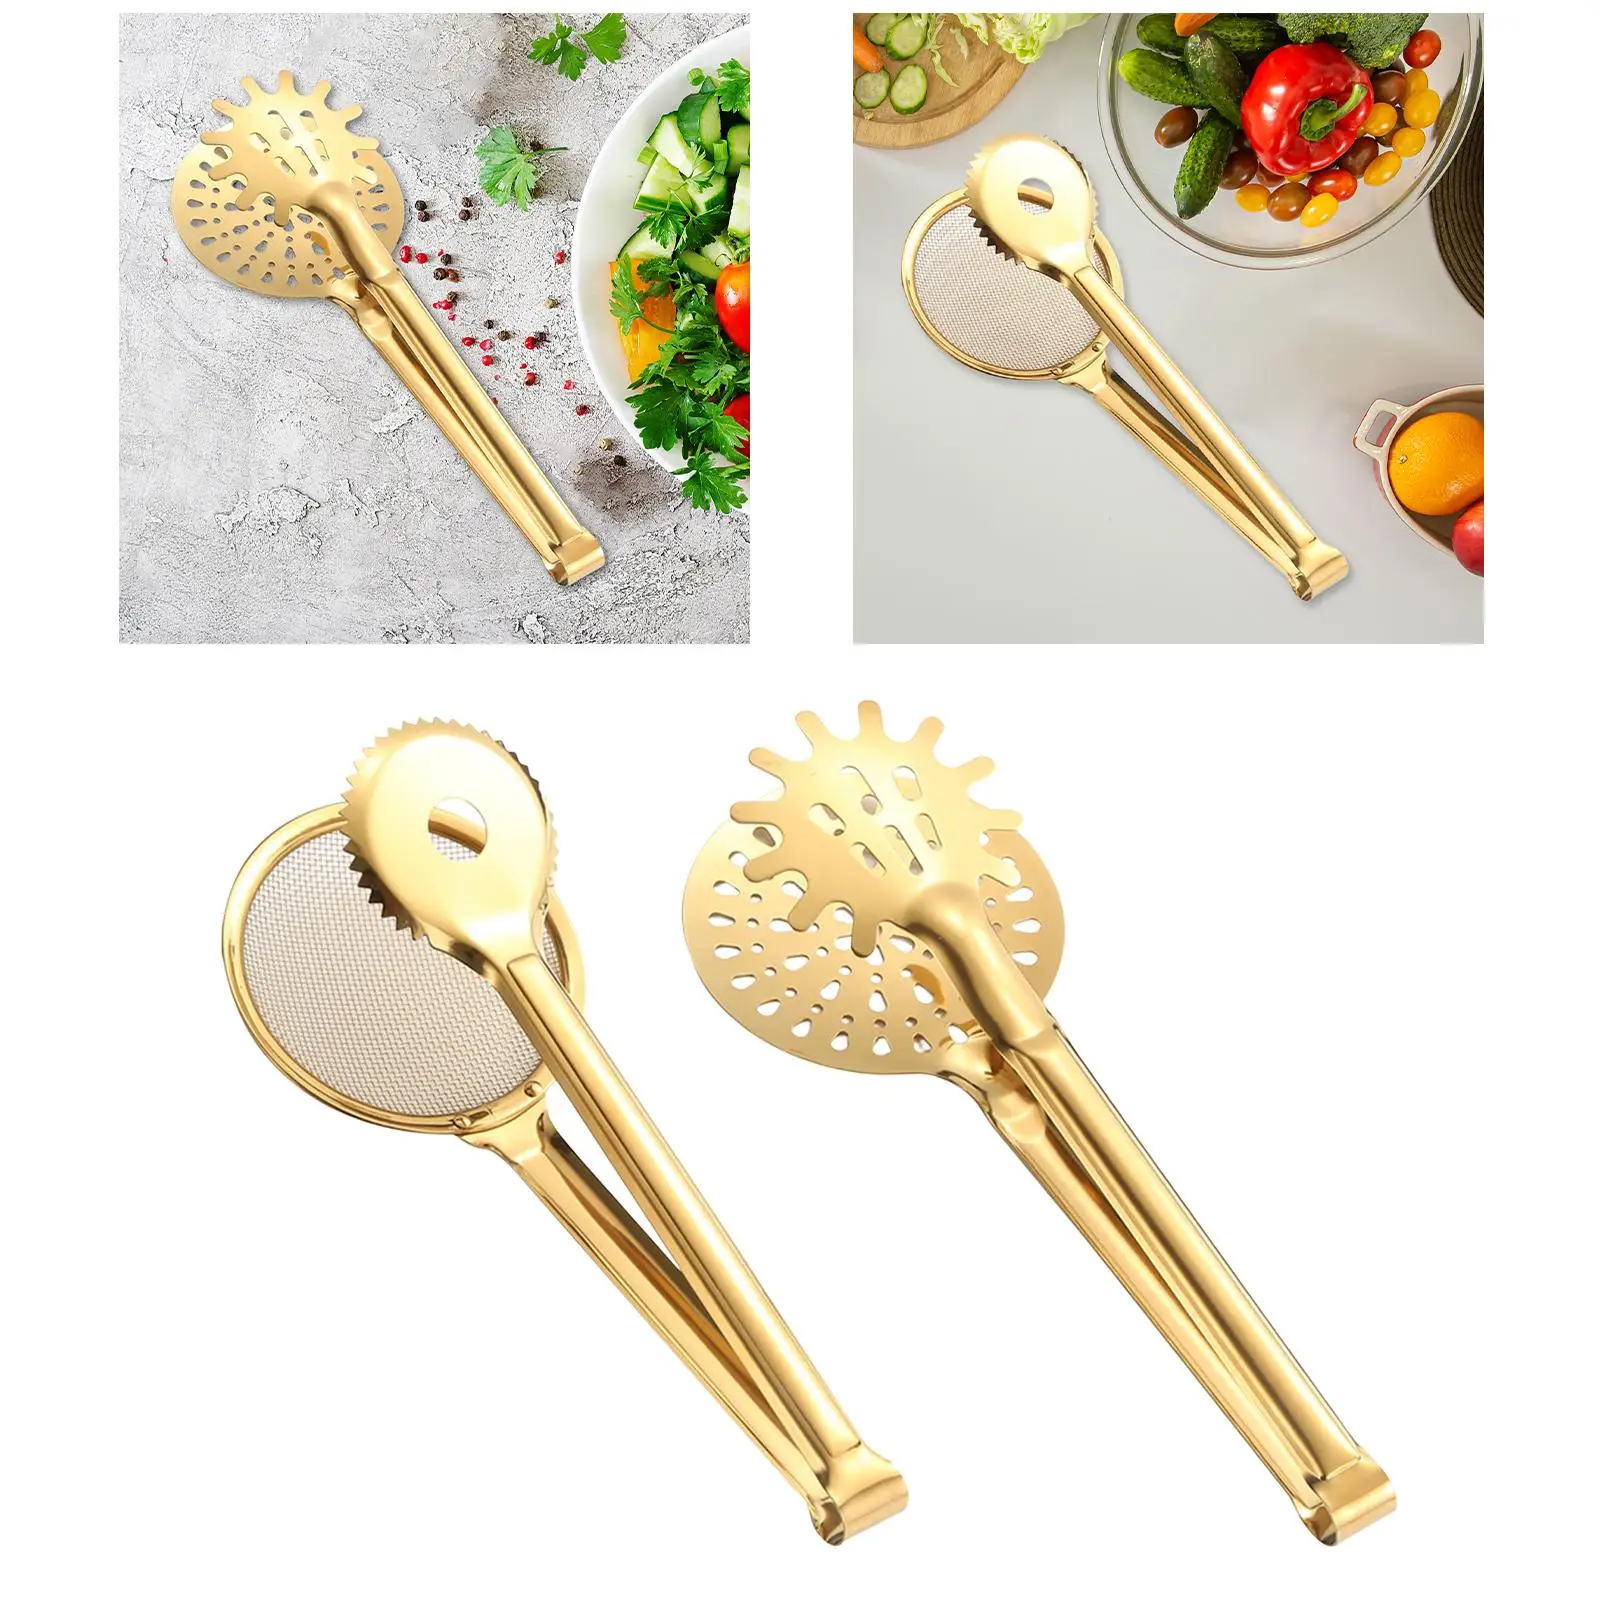 Strainer Tongs Non Slip Kitchen Tools Food Serving Utensil Food Clip Oil Filter Spoon for BBQ Grilling Baking Cooking Steak